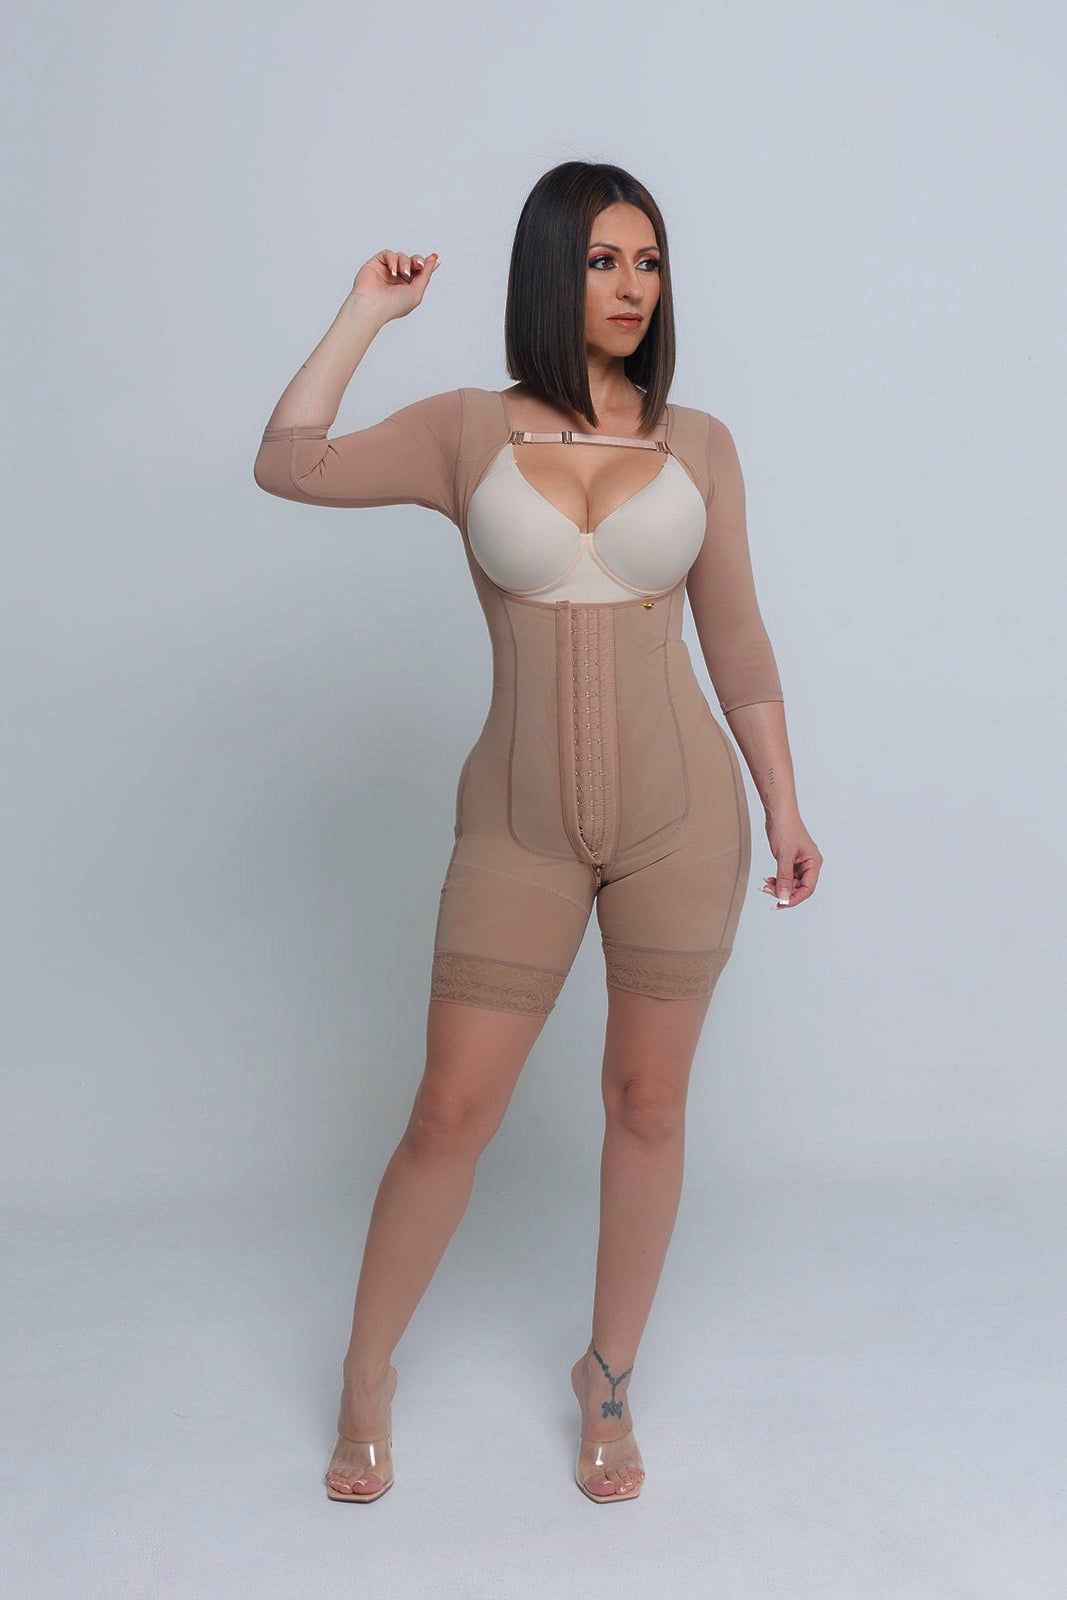 KCOUTURE The #1 Destination for authentic Colombian Fajas & Shapewear – KIMMI  COUTURE